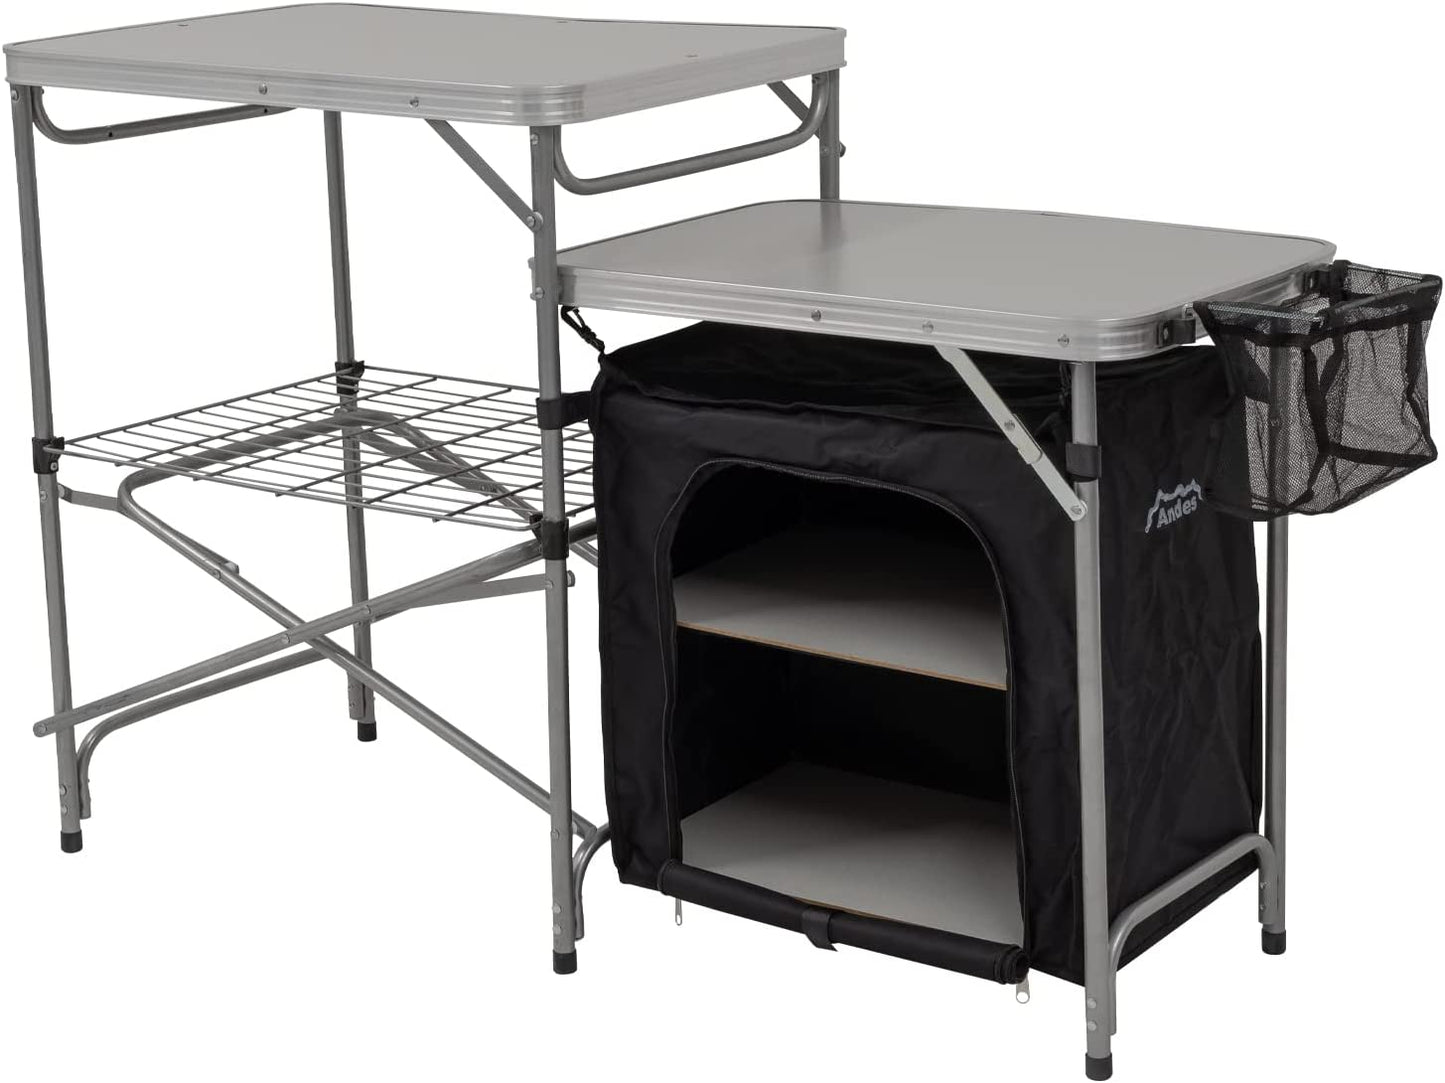 Andes Camping Field Kitchen Worktop Table Stand With Cupboard & Windshield